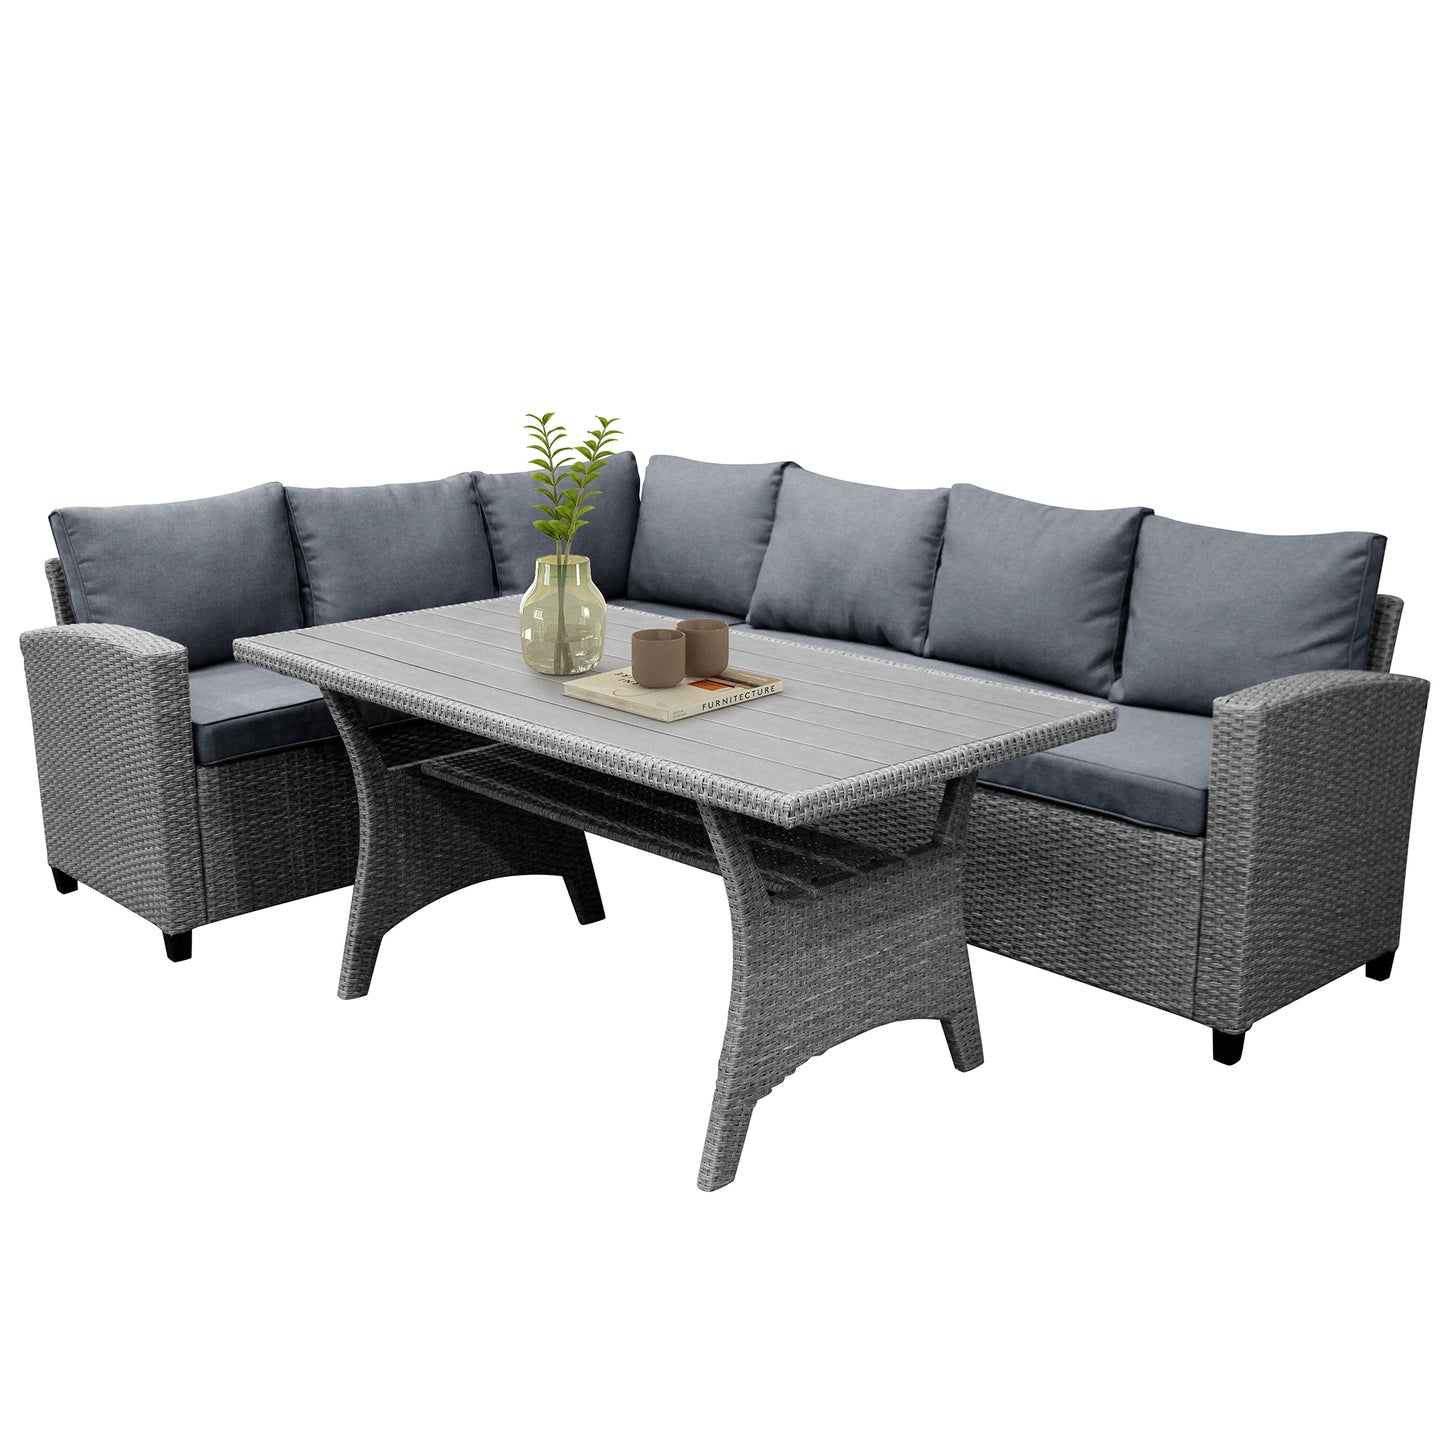 TOPMAX Patio Outdoor Furniture PE Rattan Wicker Conversation Set All-Weather Sectional Sofa Set with Table & Soft Cushions (Grey)